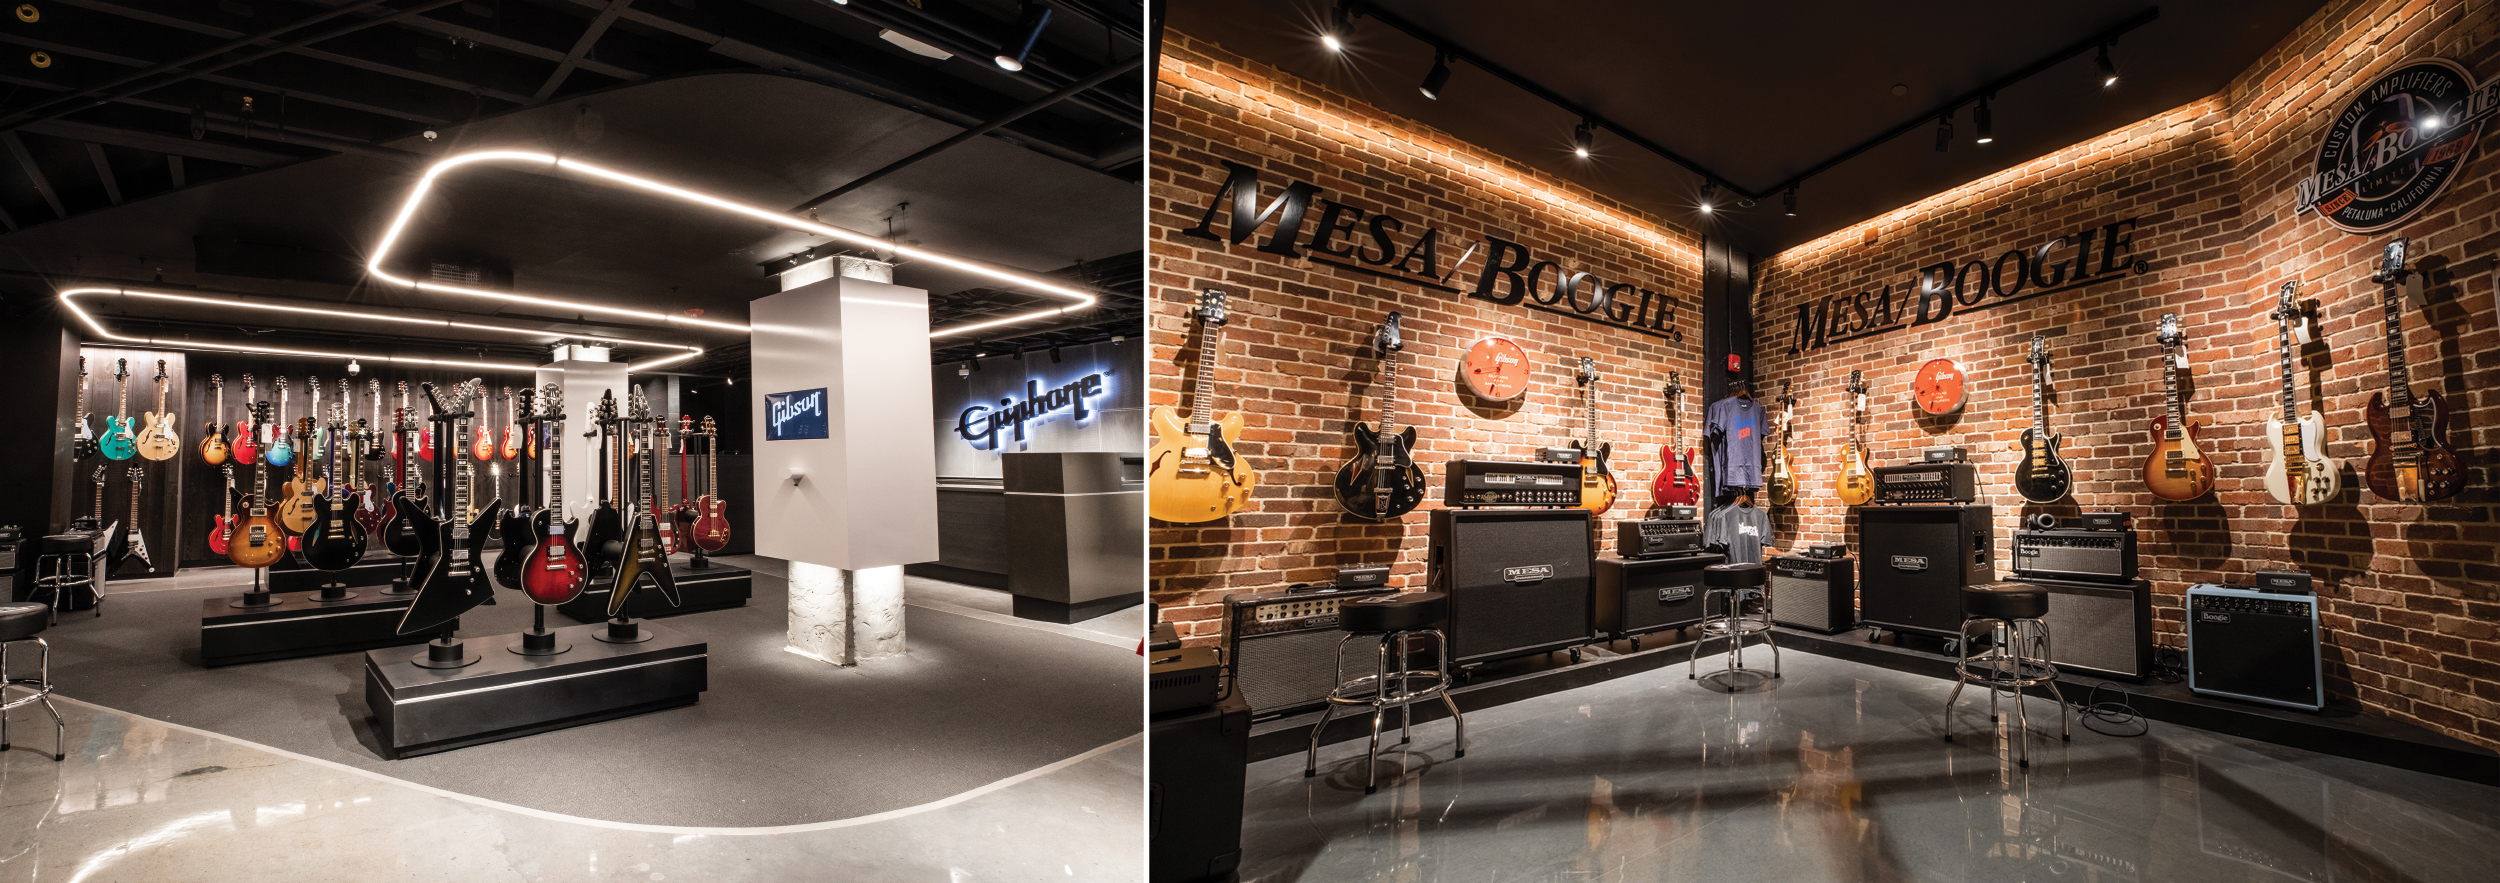 Dedicated areas, like this one for Mesa Boogie (shown), provide Gibson an opportunity to showcase affiliated brands.